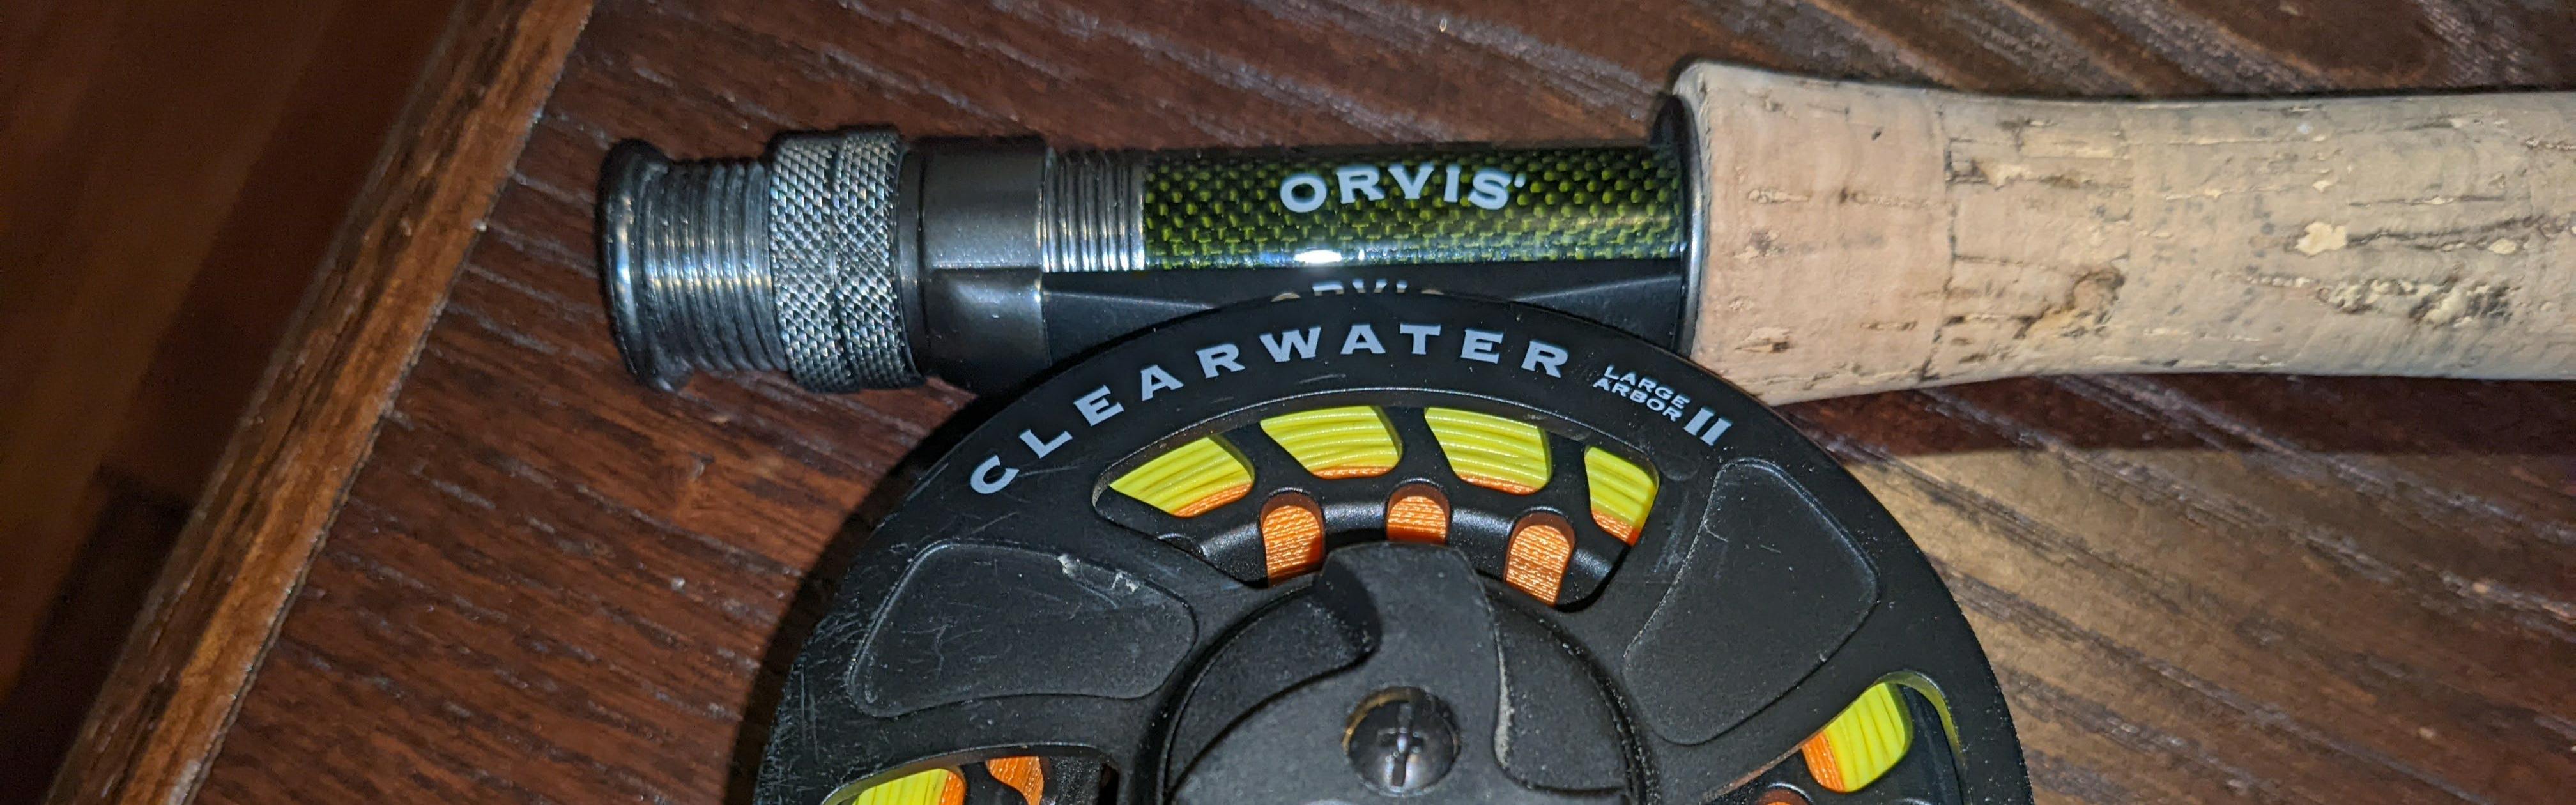 Orvis Complete Set Up, Case and More